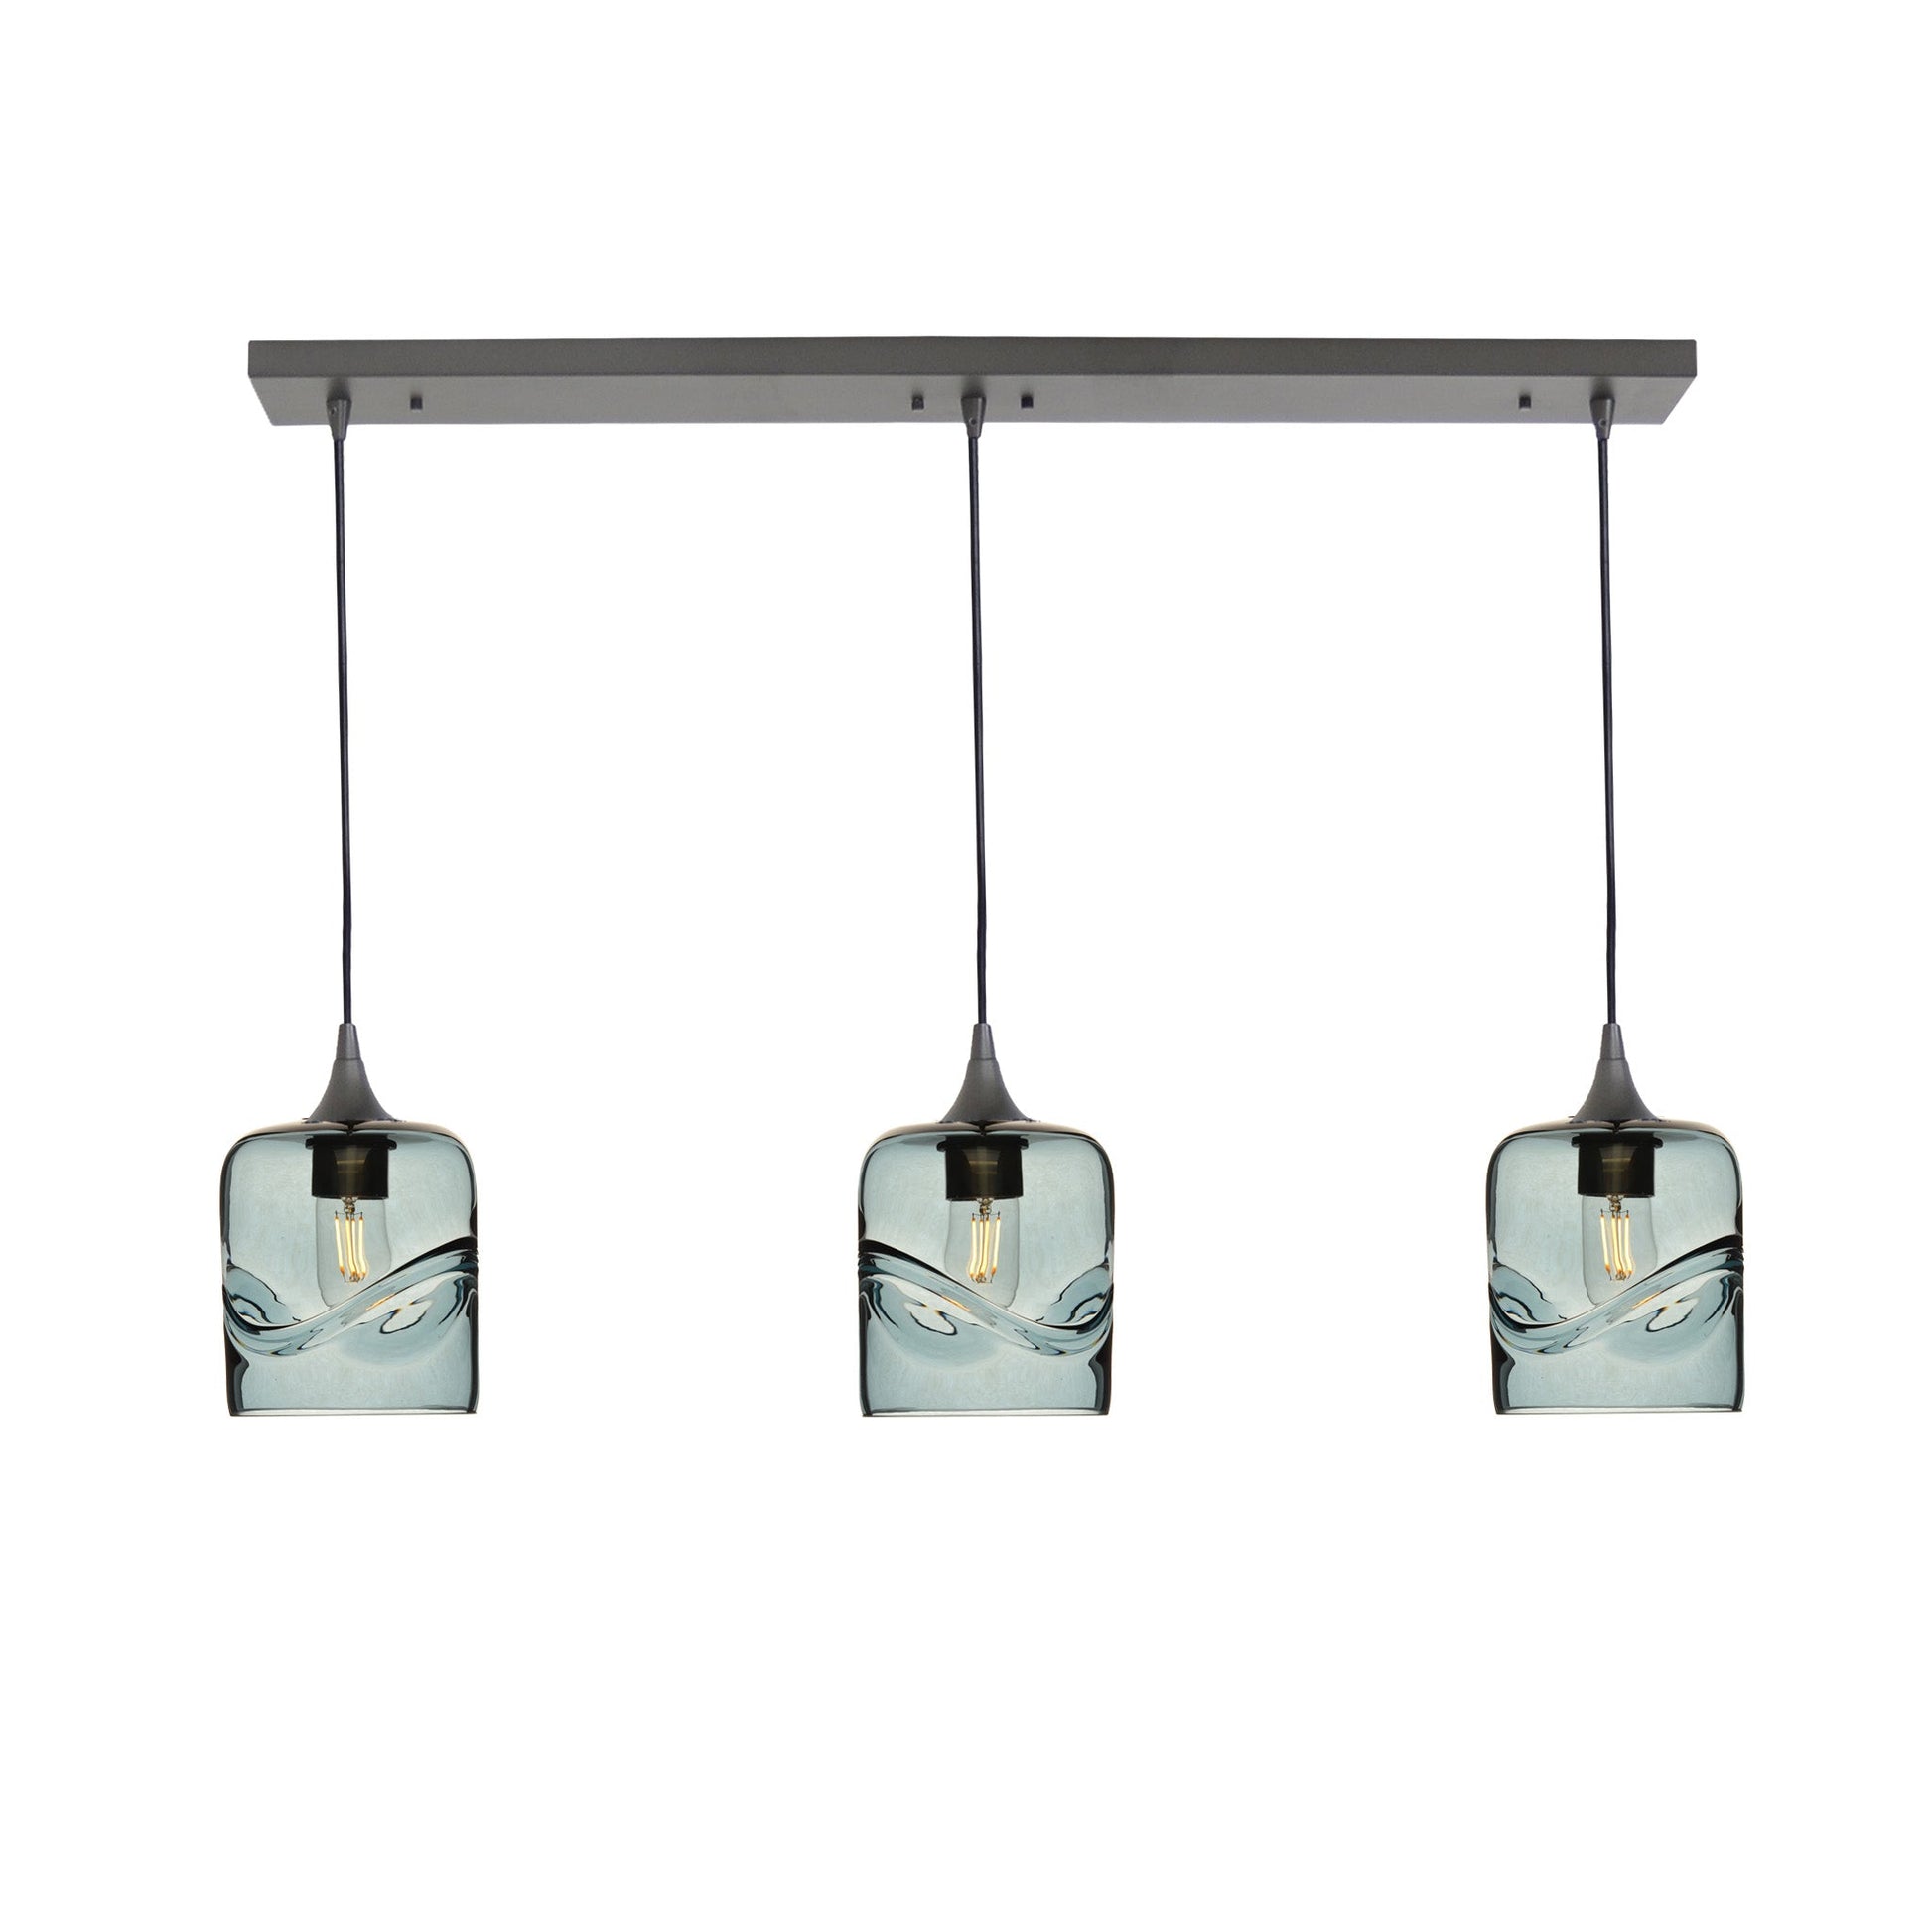 603 Swell: 3 Pendant Linear Chandelier-Glass-Bicycle Glass Co - Hotshop-Eco Clear-Bicycle Glass Co